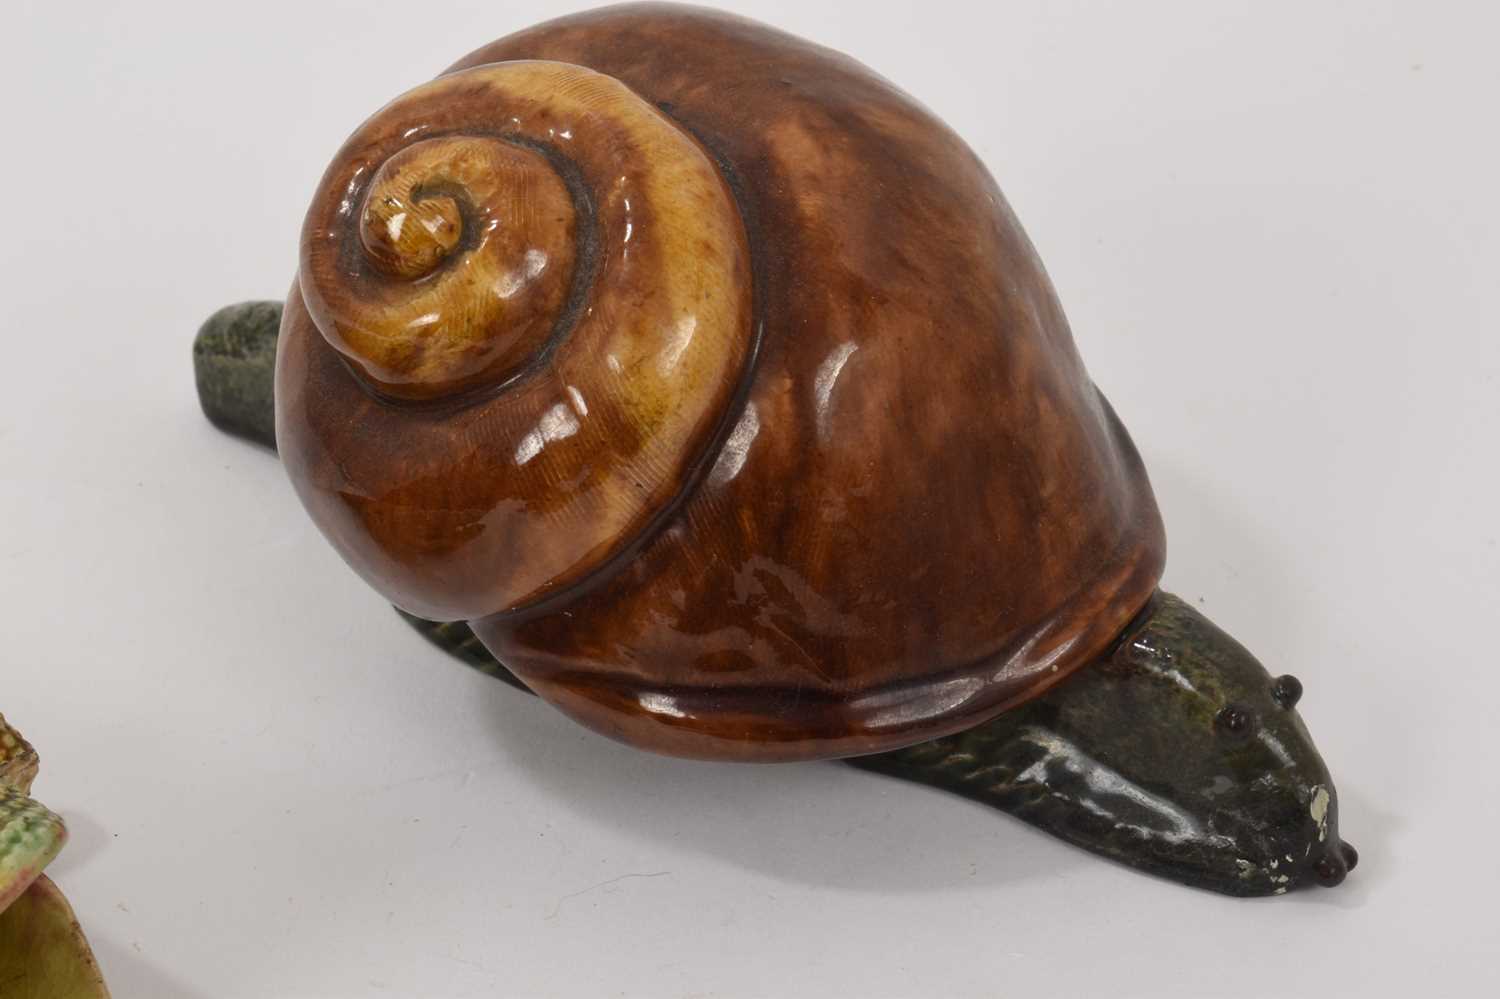 Antique Palissy ware Majolica pottery model of a toad - Jose A Cunha, Portugal, model of a snail - M - Image 4 of 5